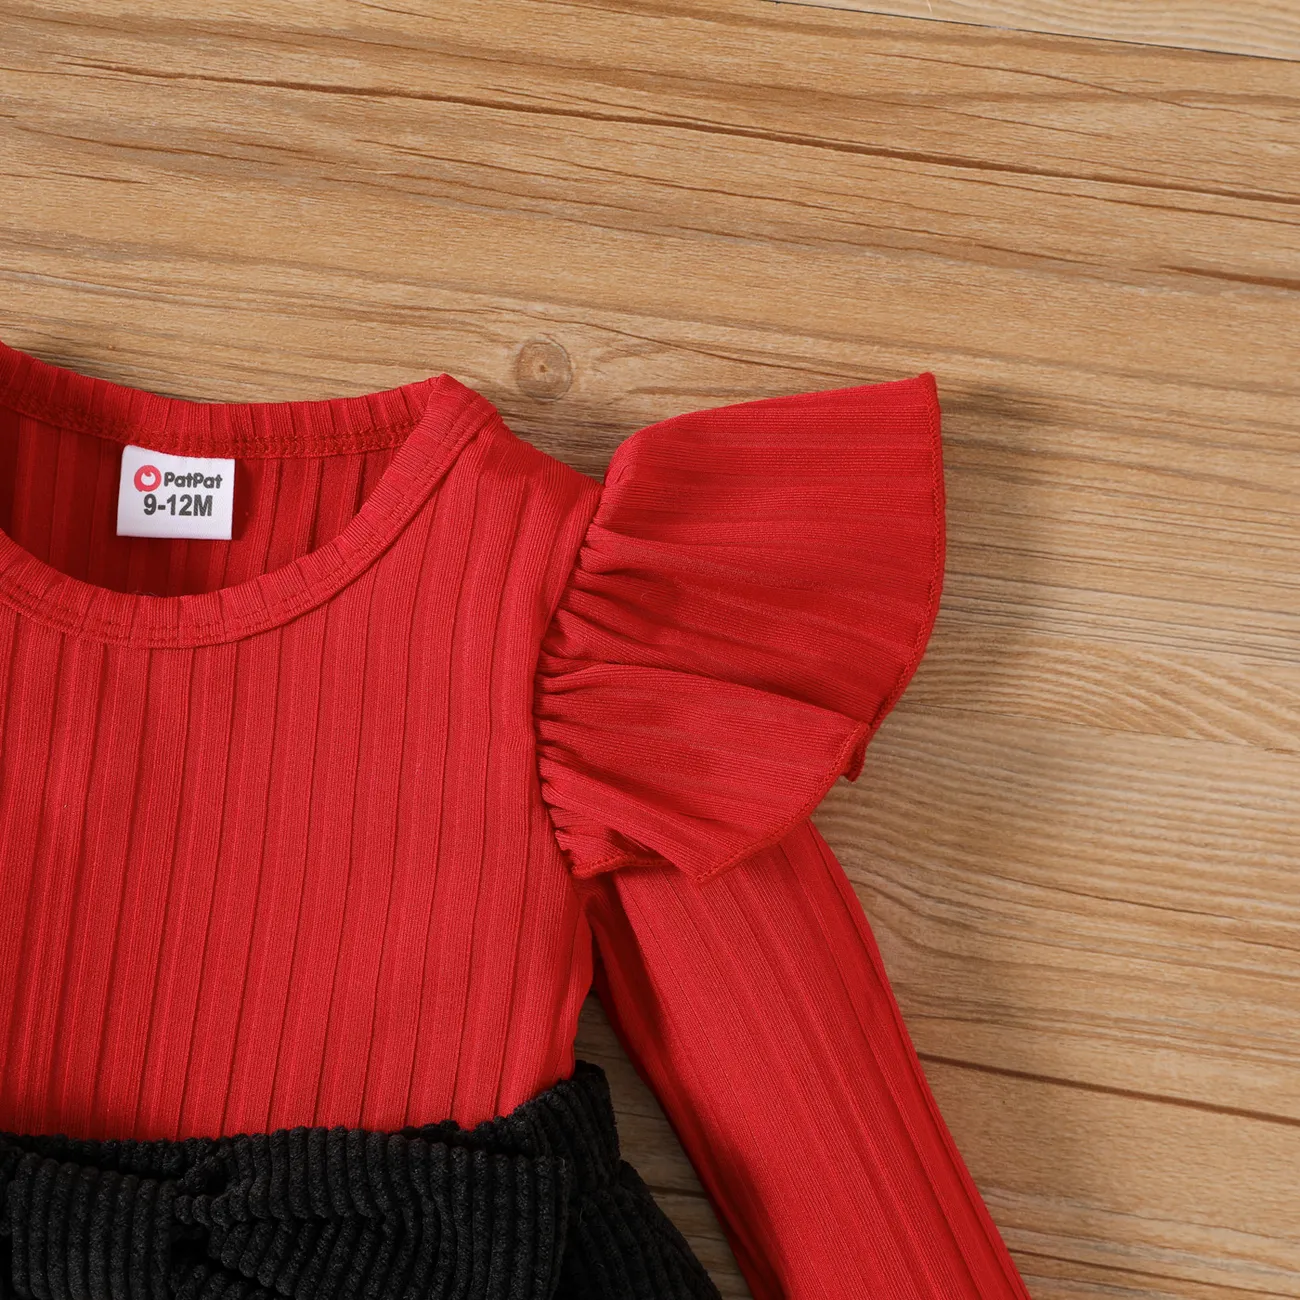 2pcs Baby Girl Rib Knit Ruffled Long-sleeve Top and Button Front Corduroy Skirt Set Red big image 1